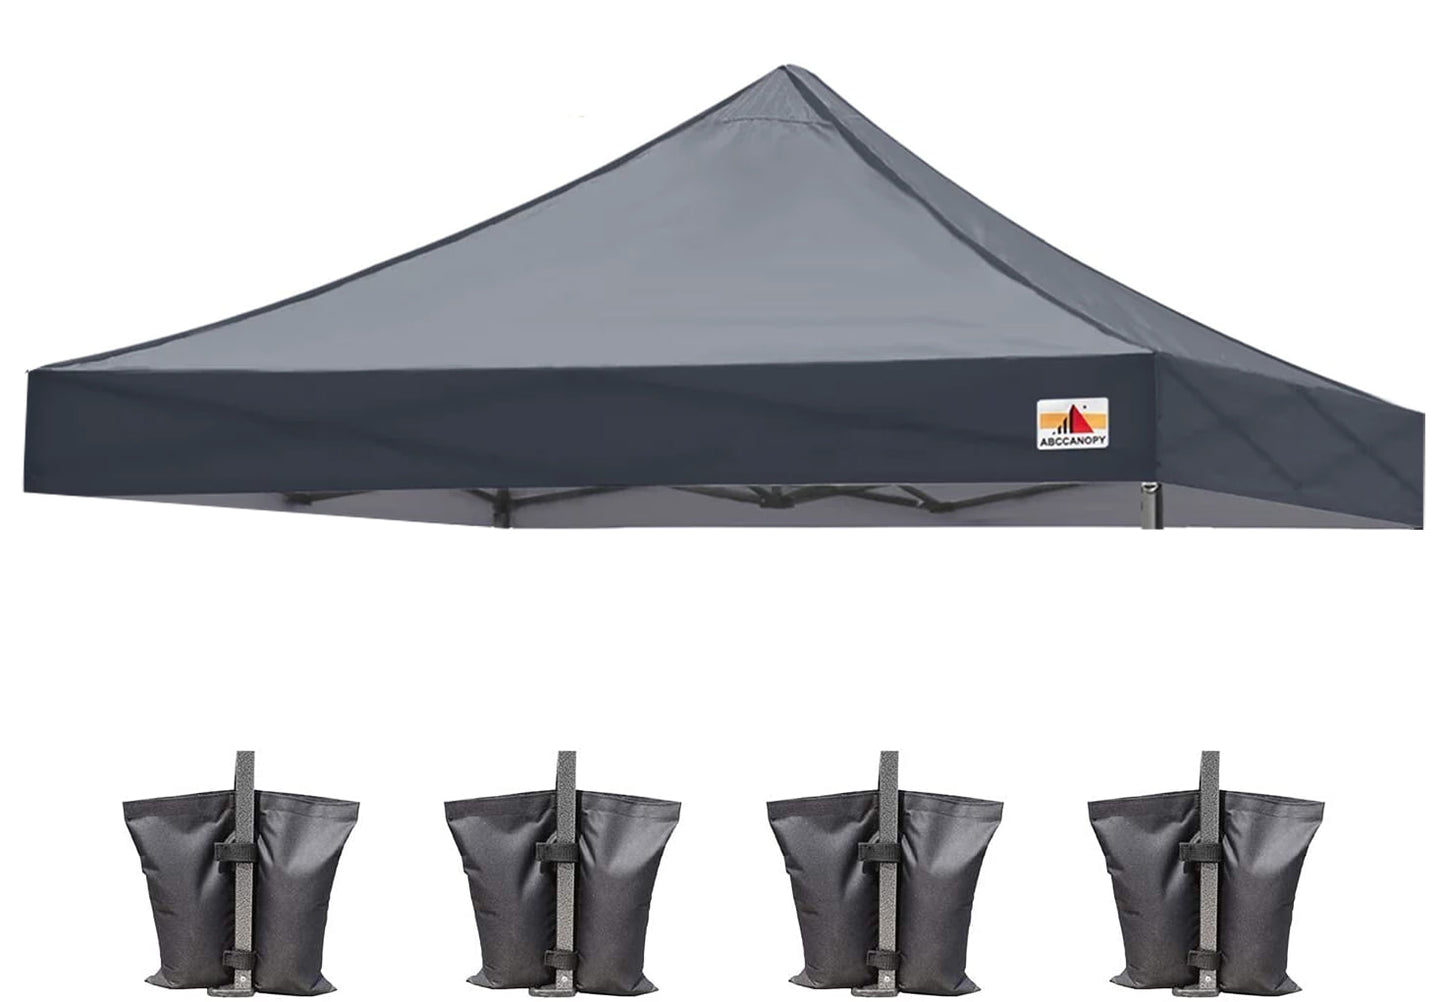 This image showcases the Black Canopy TOP tailored specifically for the ABCCANOPY Commercial Deluxe 10x10 Canopy. Its crisp white color provides a refreshing and inviting atmosphere.